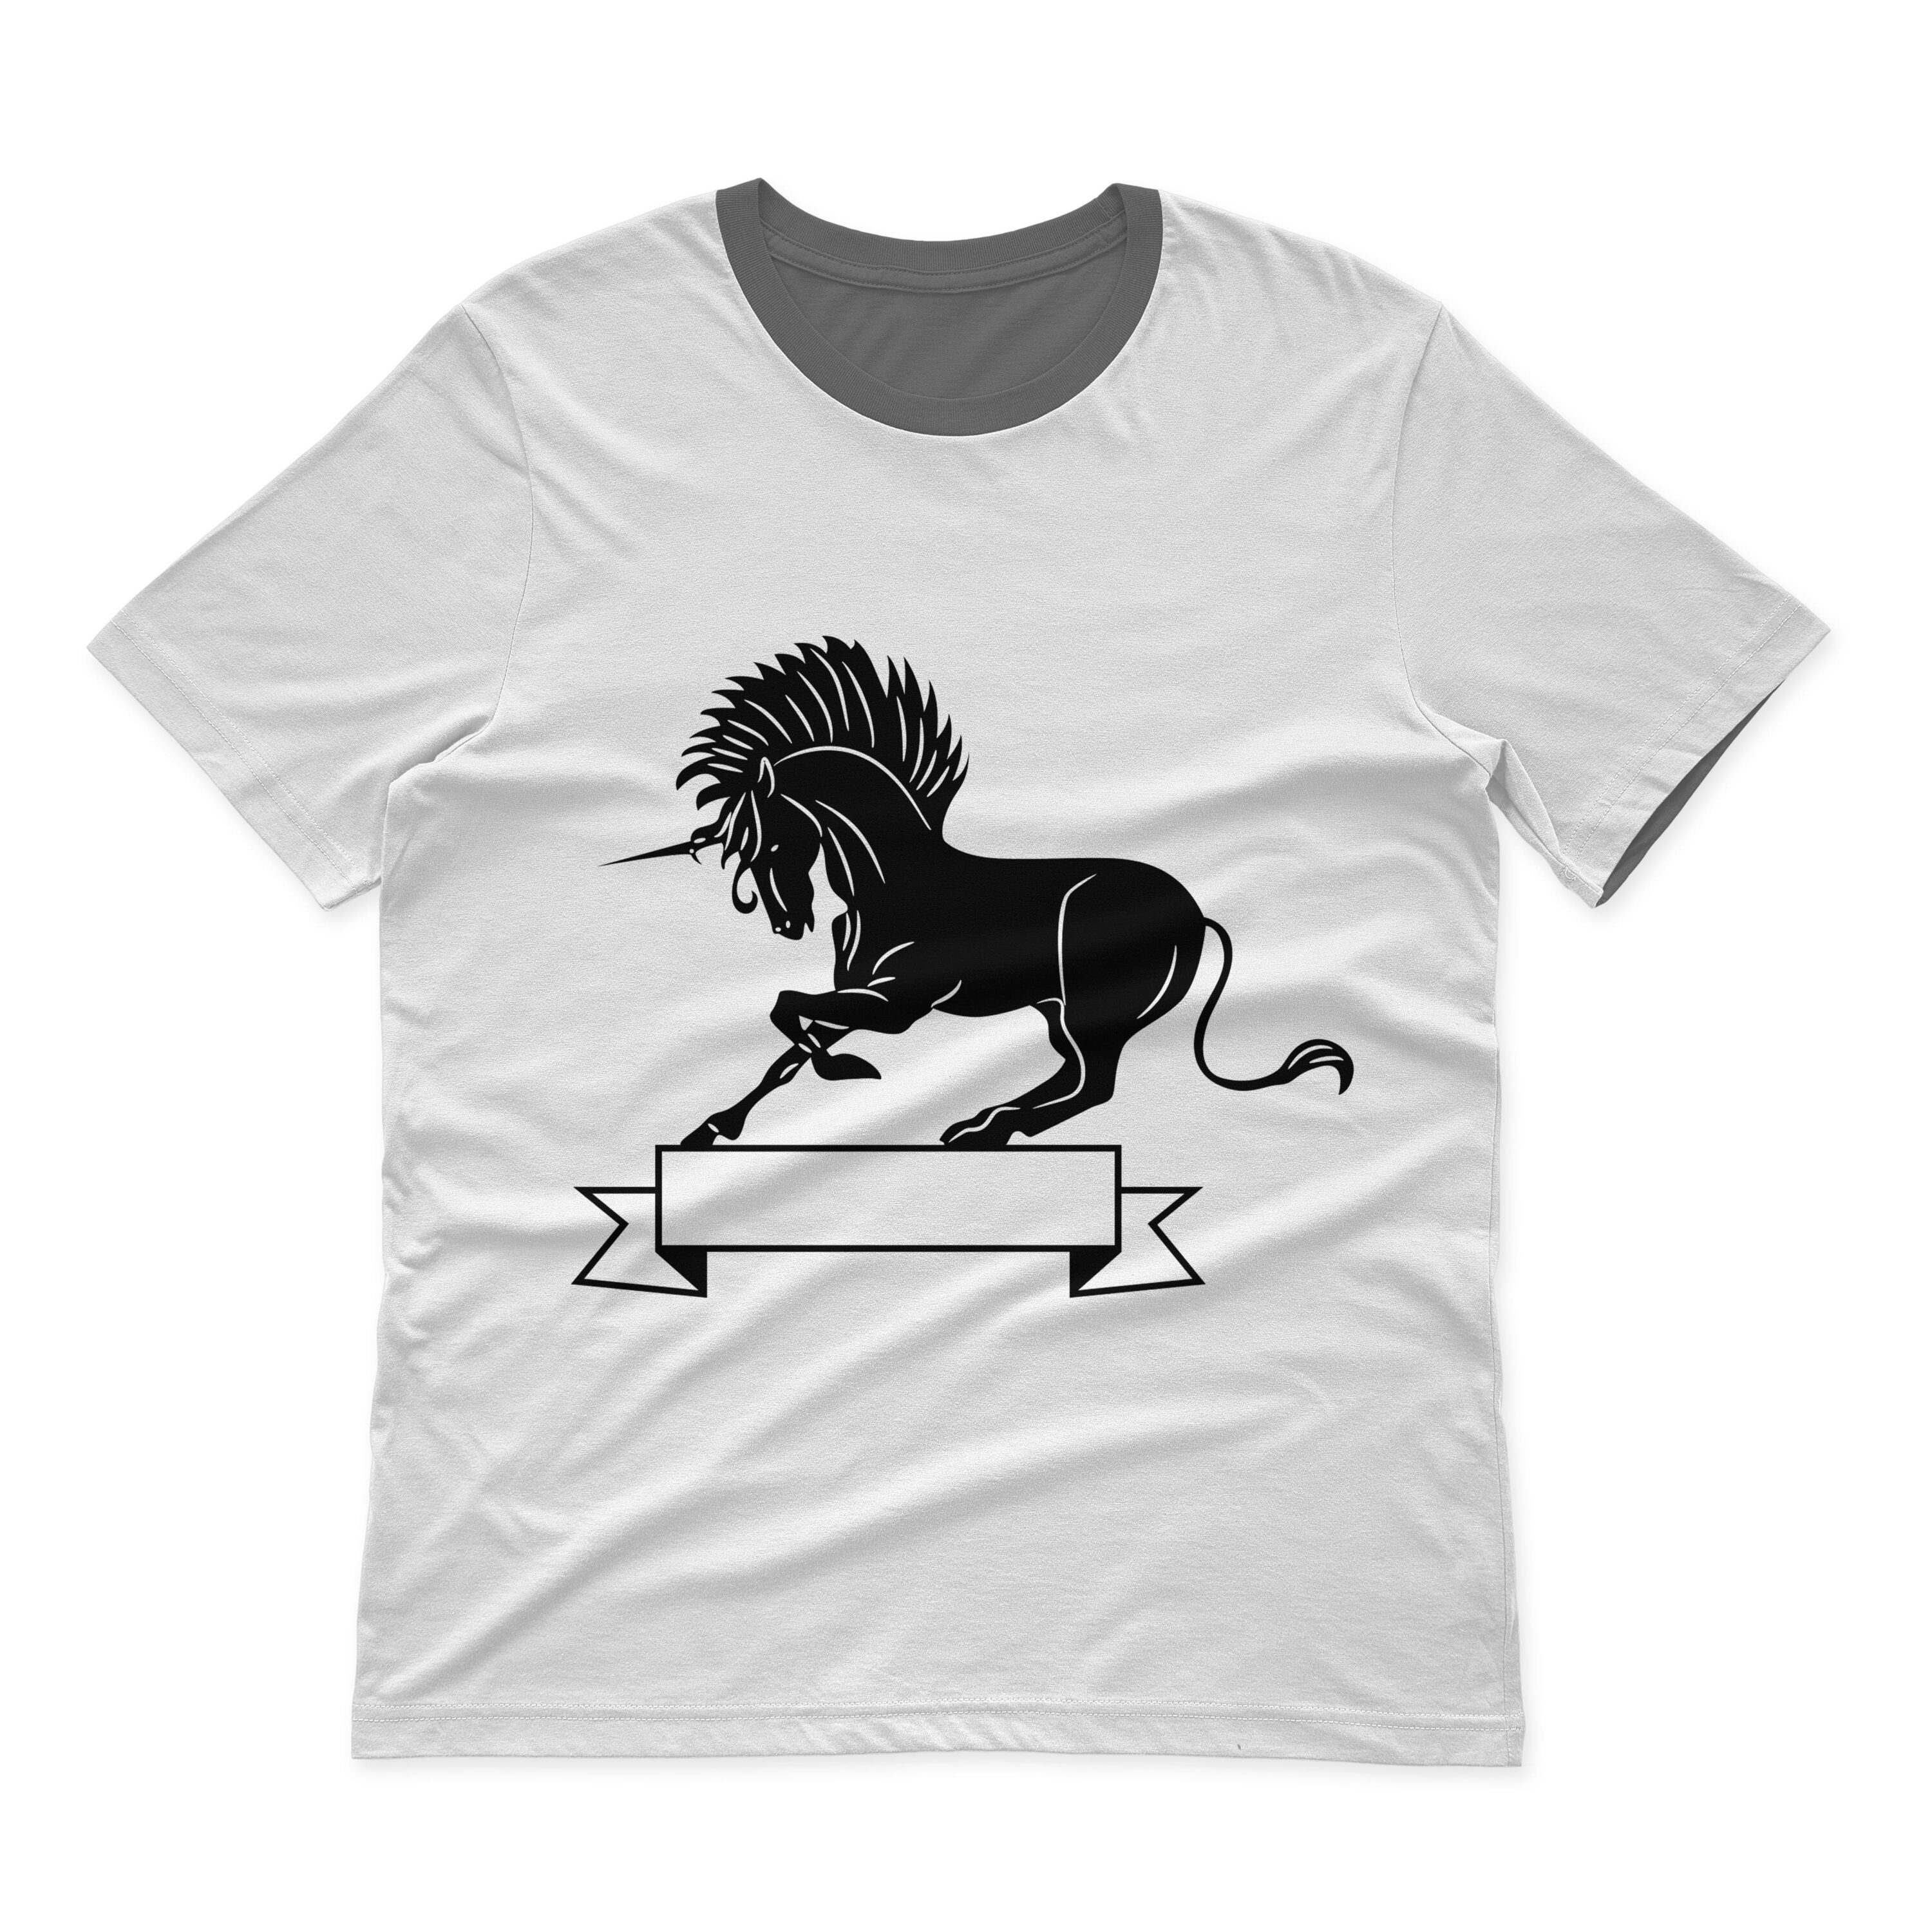 Gray t-shirt with a dark gray collar and a unicorn monogram on a white background.